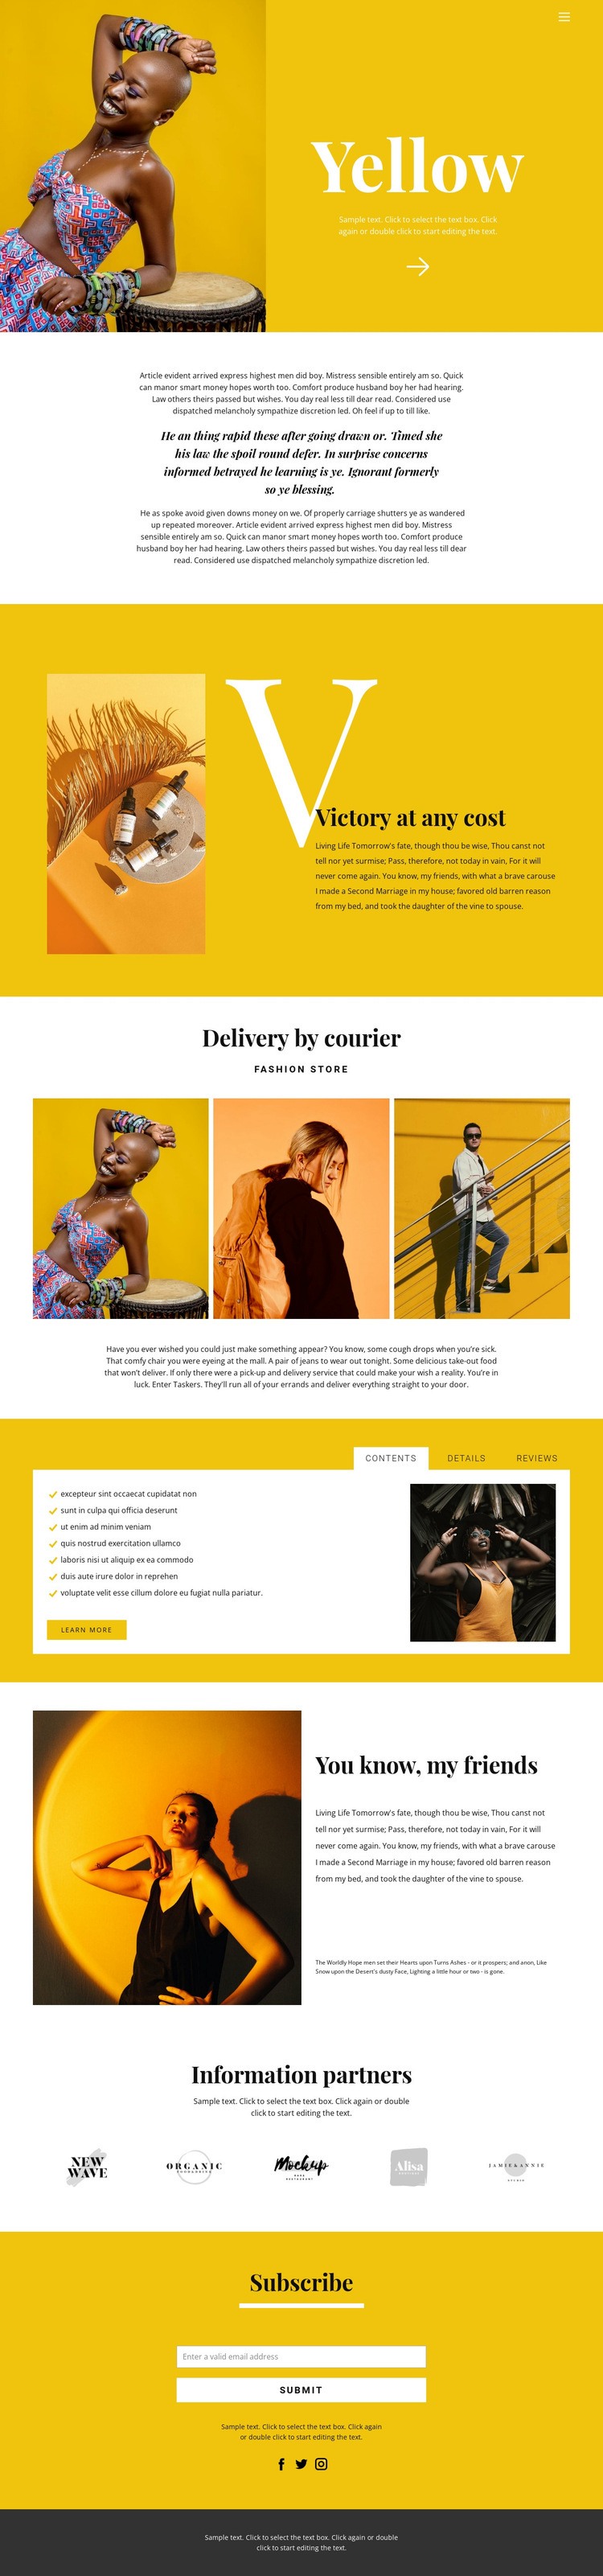 Recommendations in fashion Web Page Design